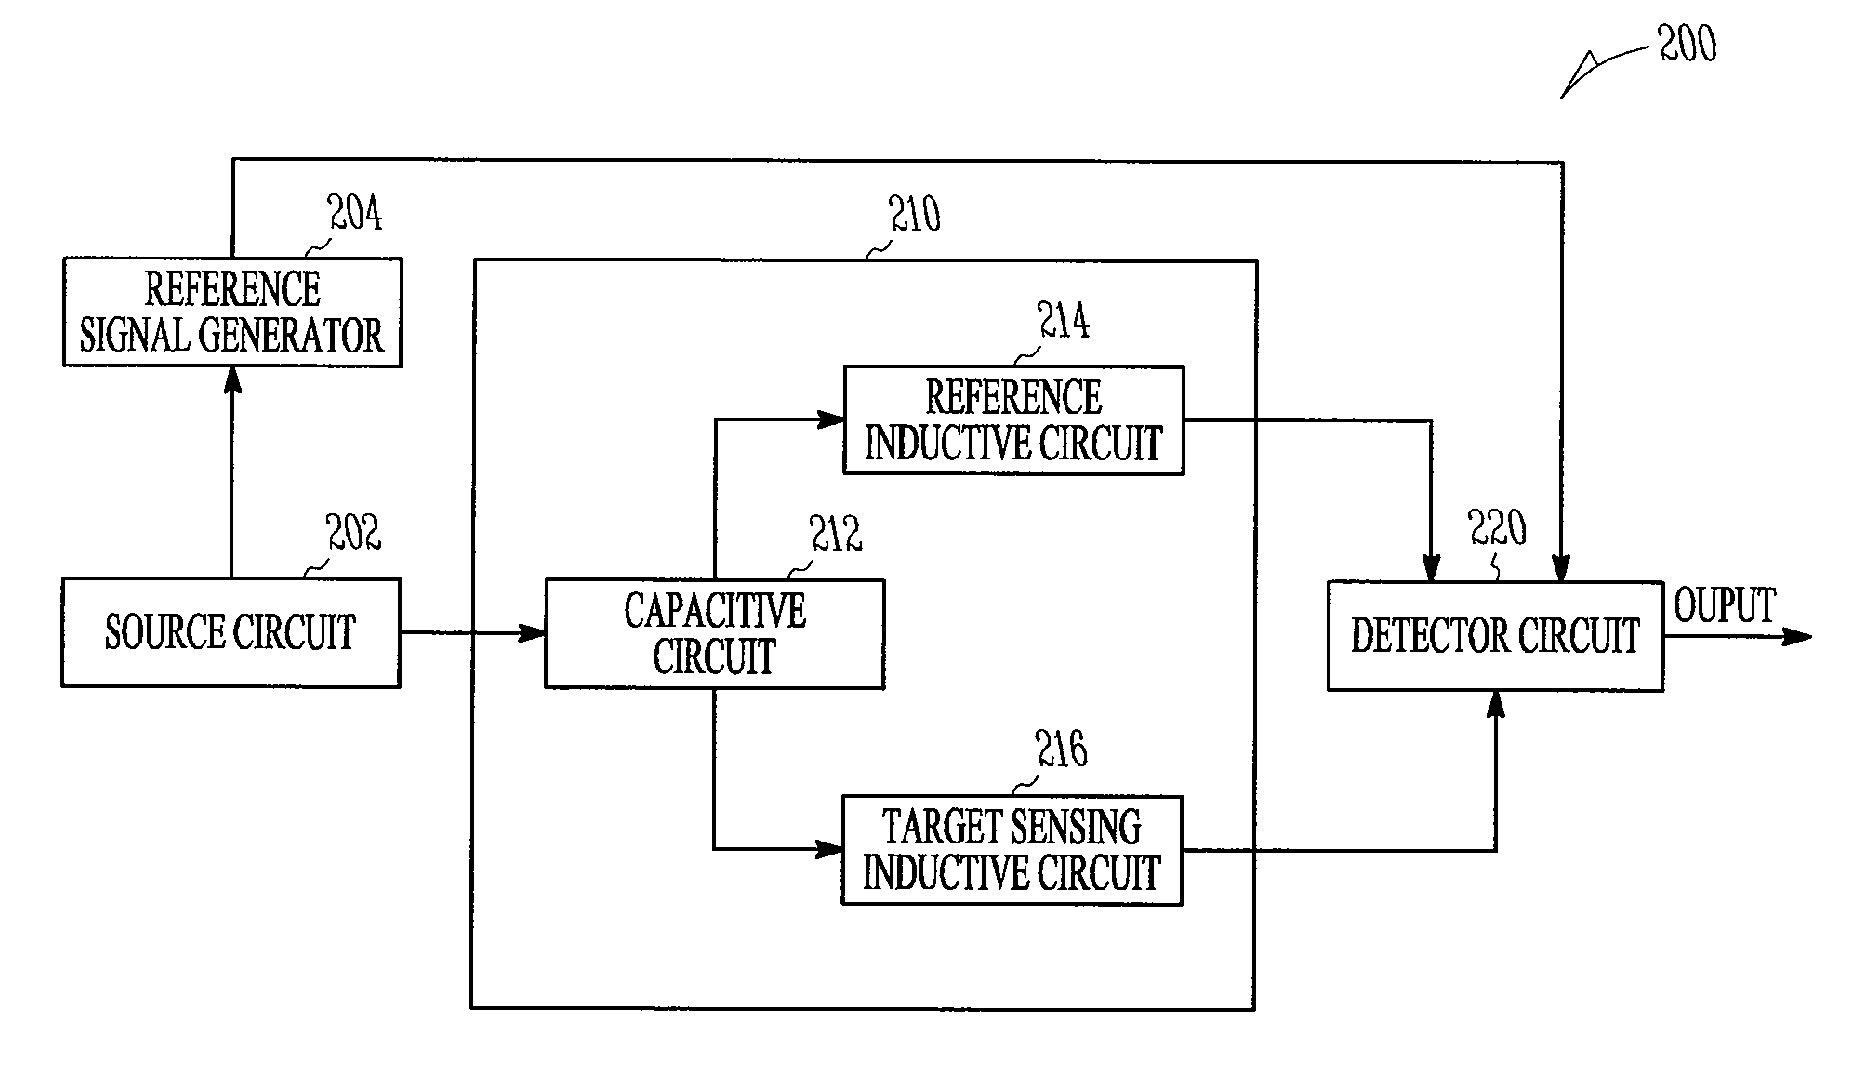 Apparatus and methods for proximity sensing circuitry